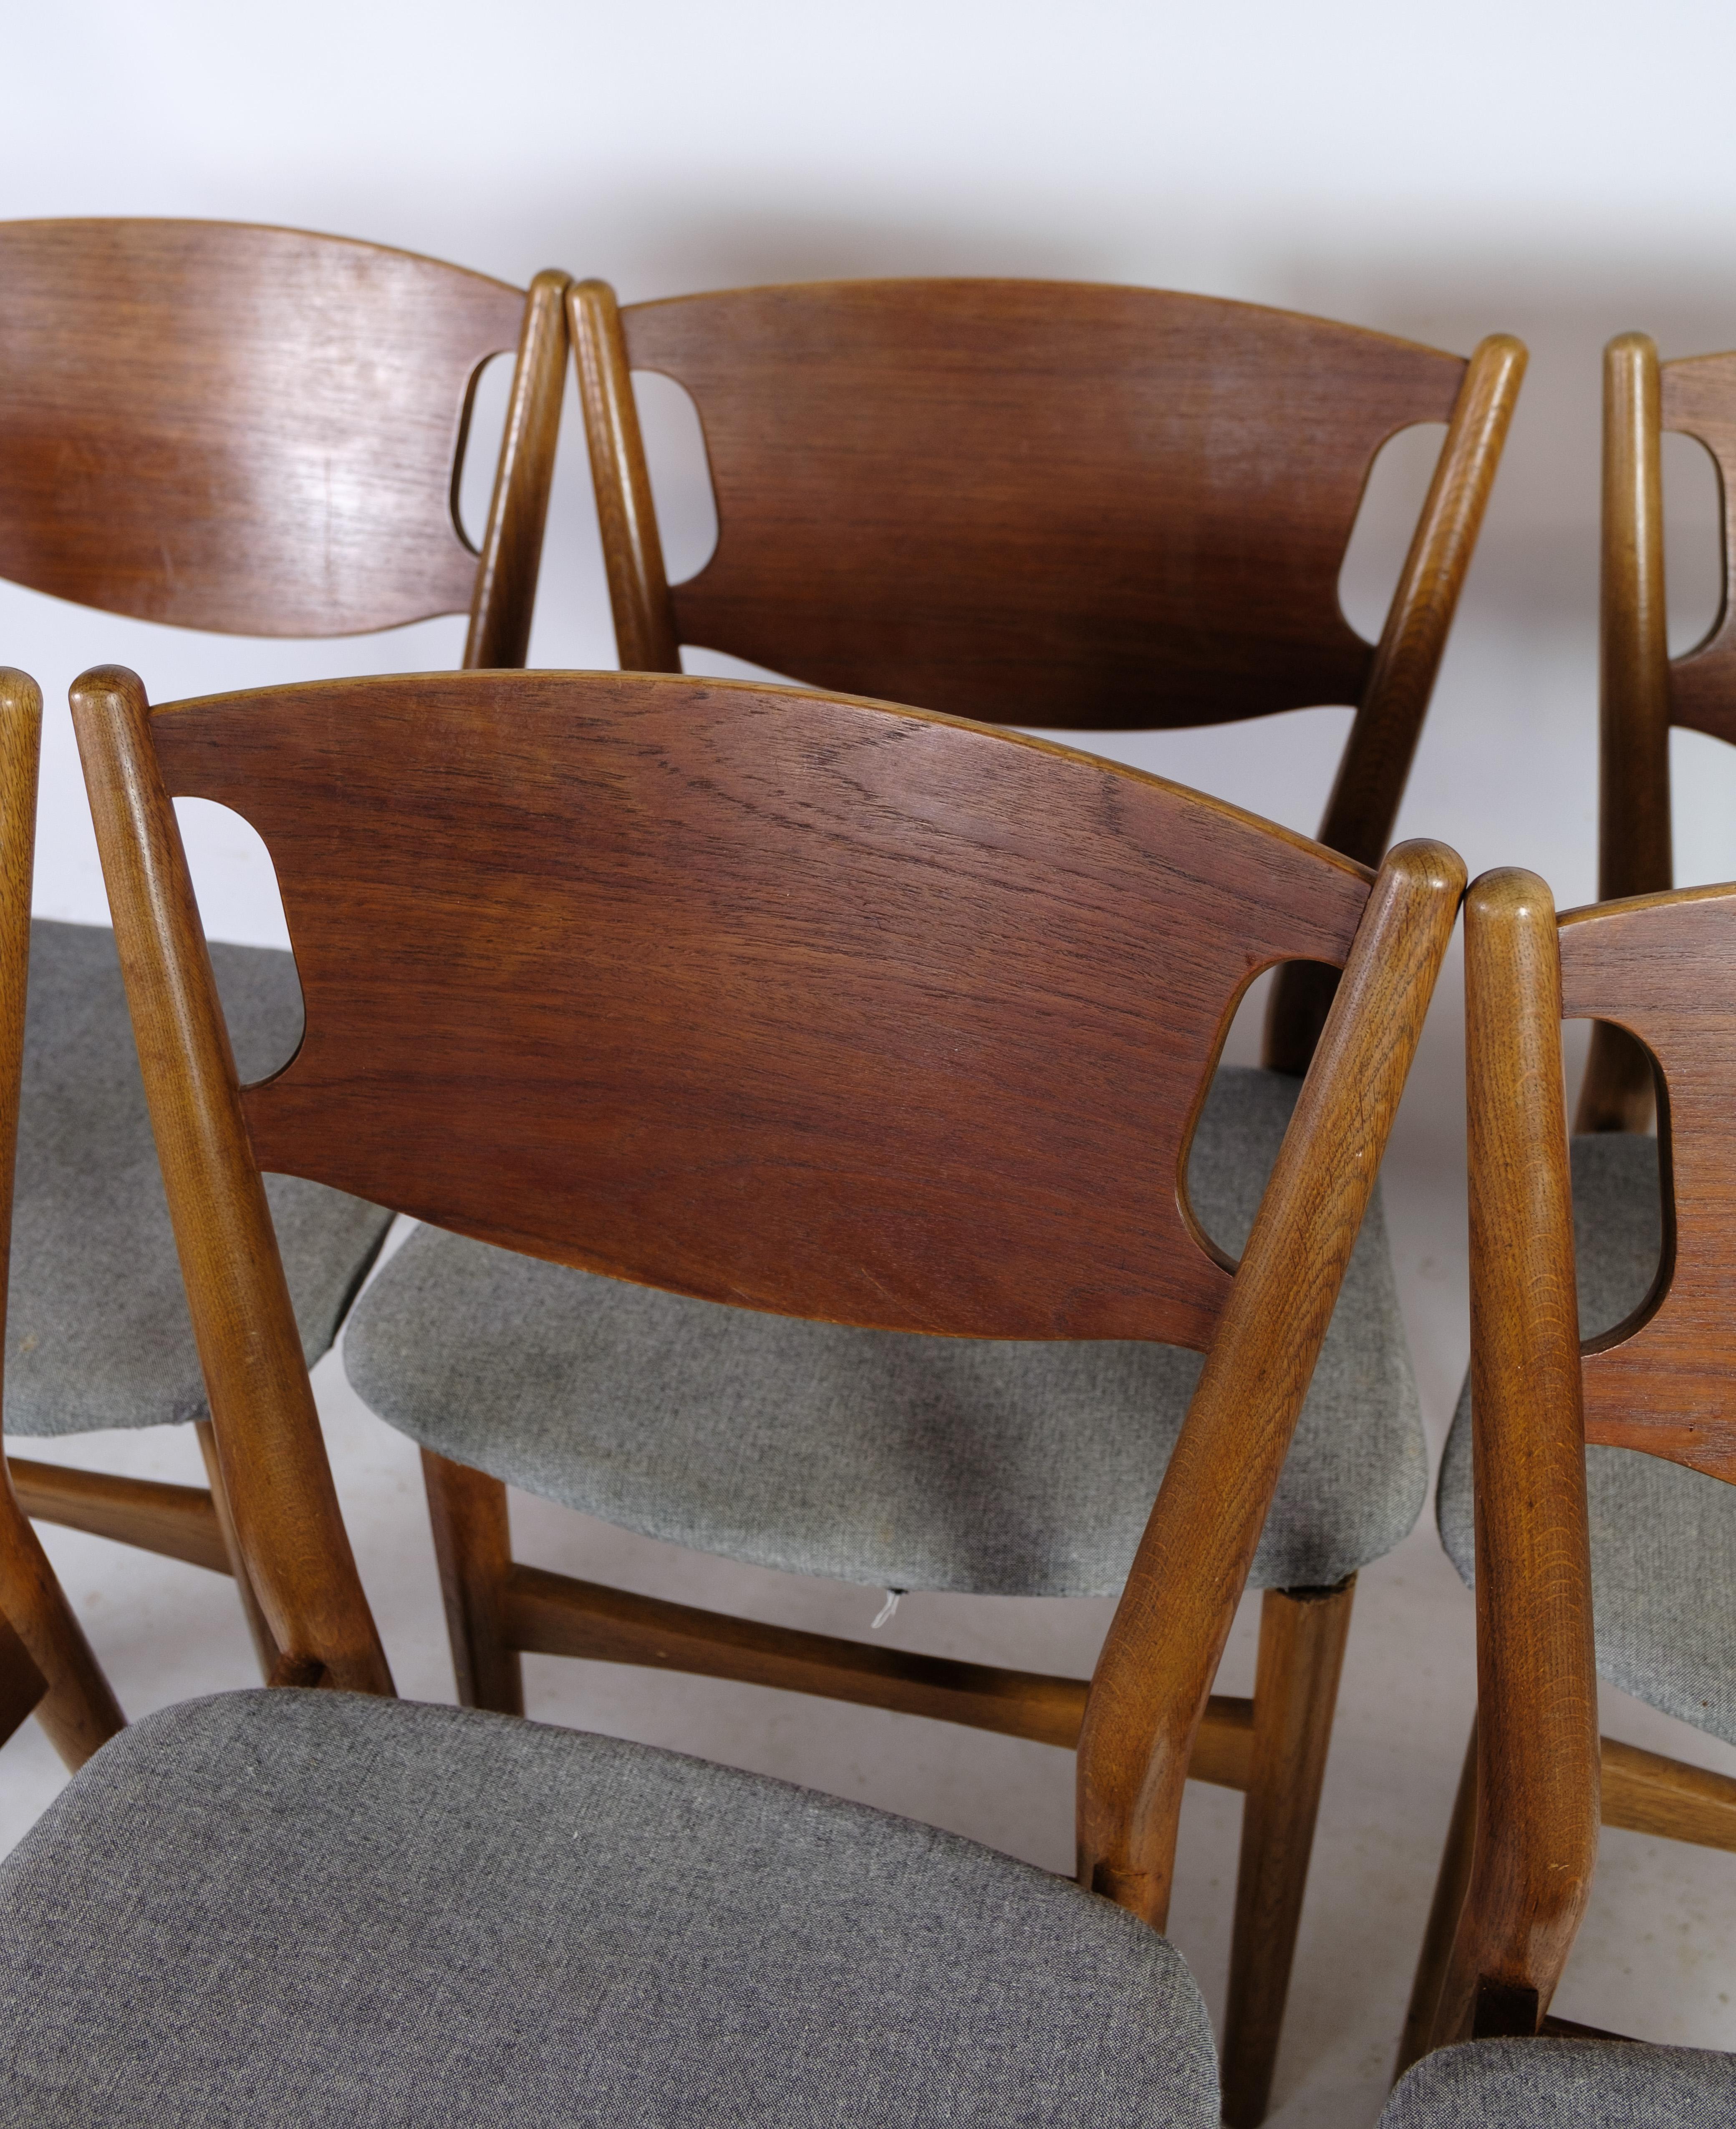 A set of six dining chairs, Model 42A, designed by the esteemed Helge Sibast in the 1950s, offers a timeless addition to any dining space. Crafted from oak and teak, these chairs showcase the enduring elegance of Scandinavian design.

Helge Sibast's